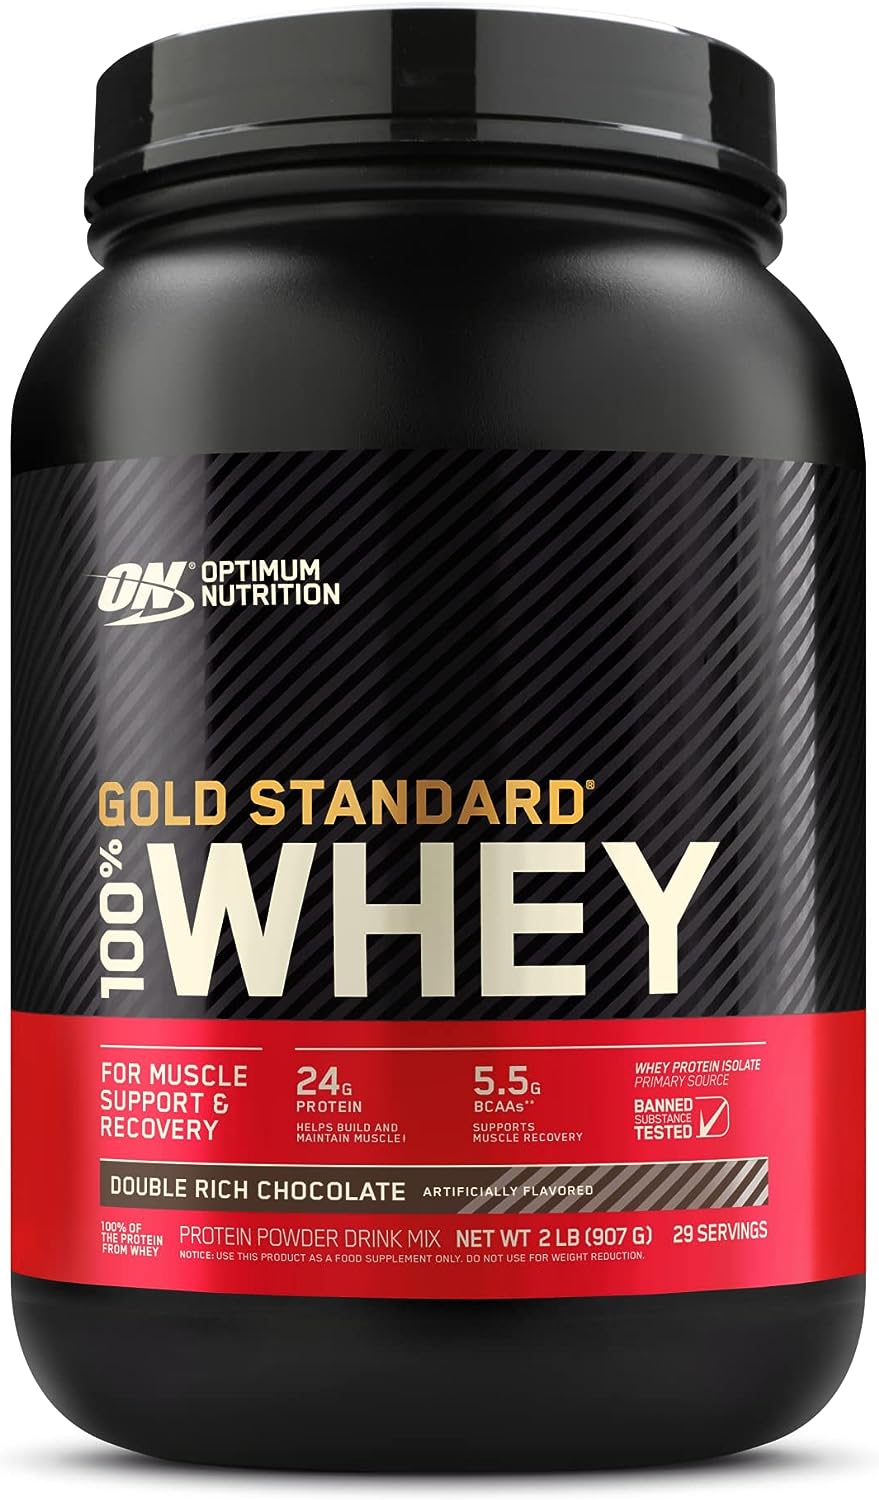 Whey Protein Powder: Optimum Fitness Supplements for Results